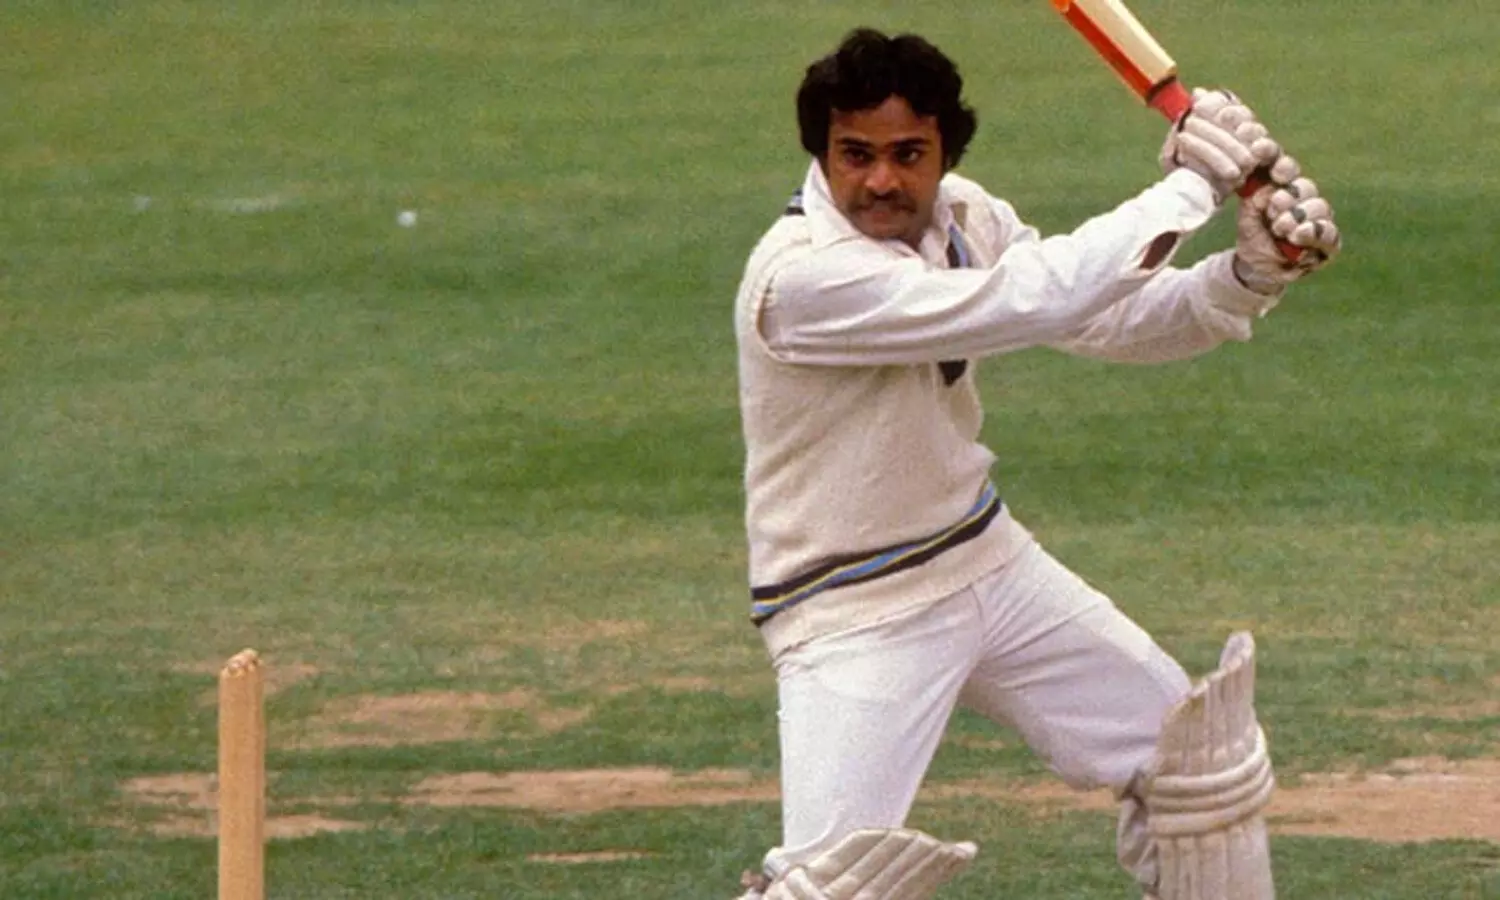 Former Indian Cricketer Yashpal Sharma dies of heart attack